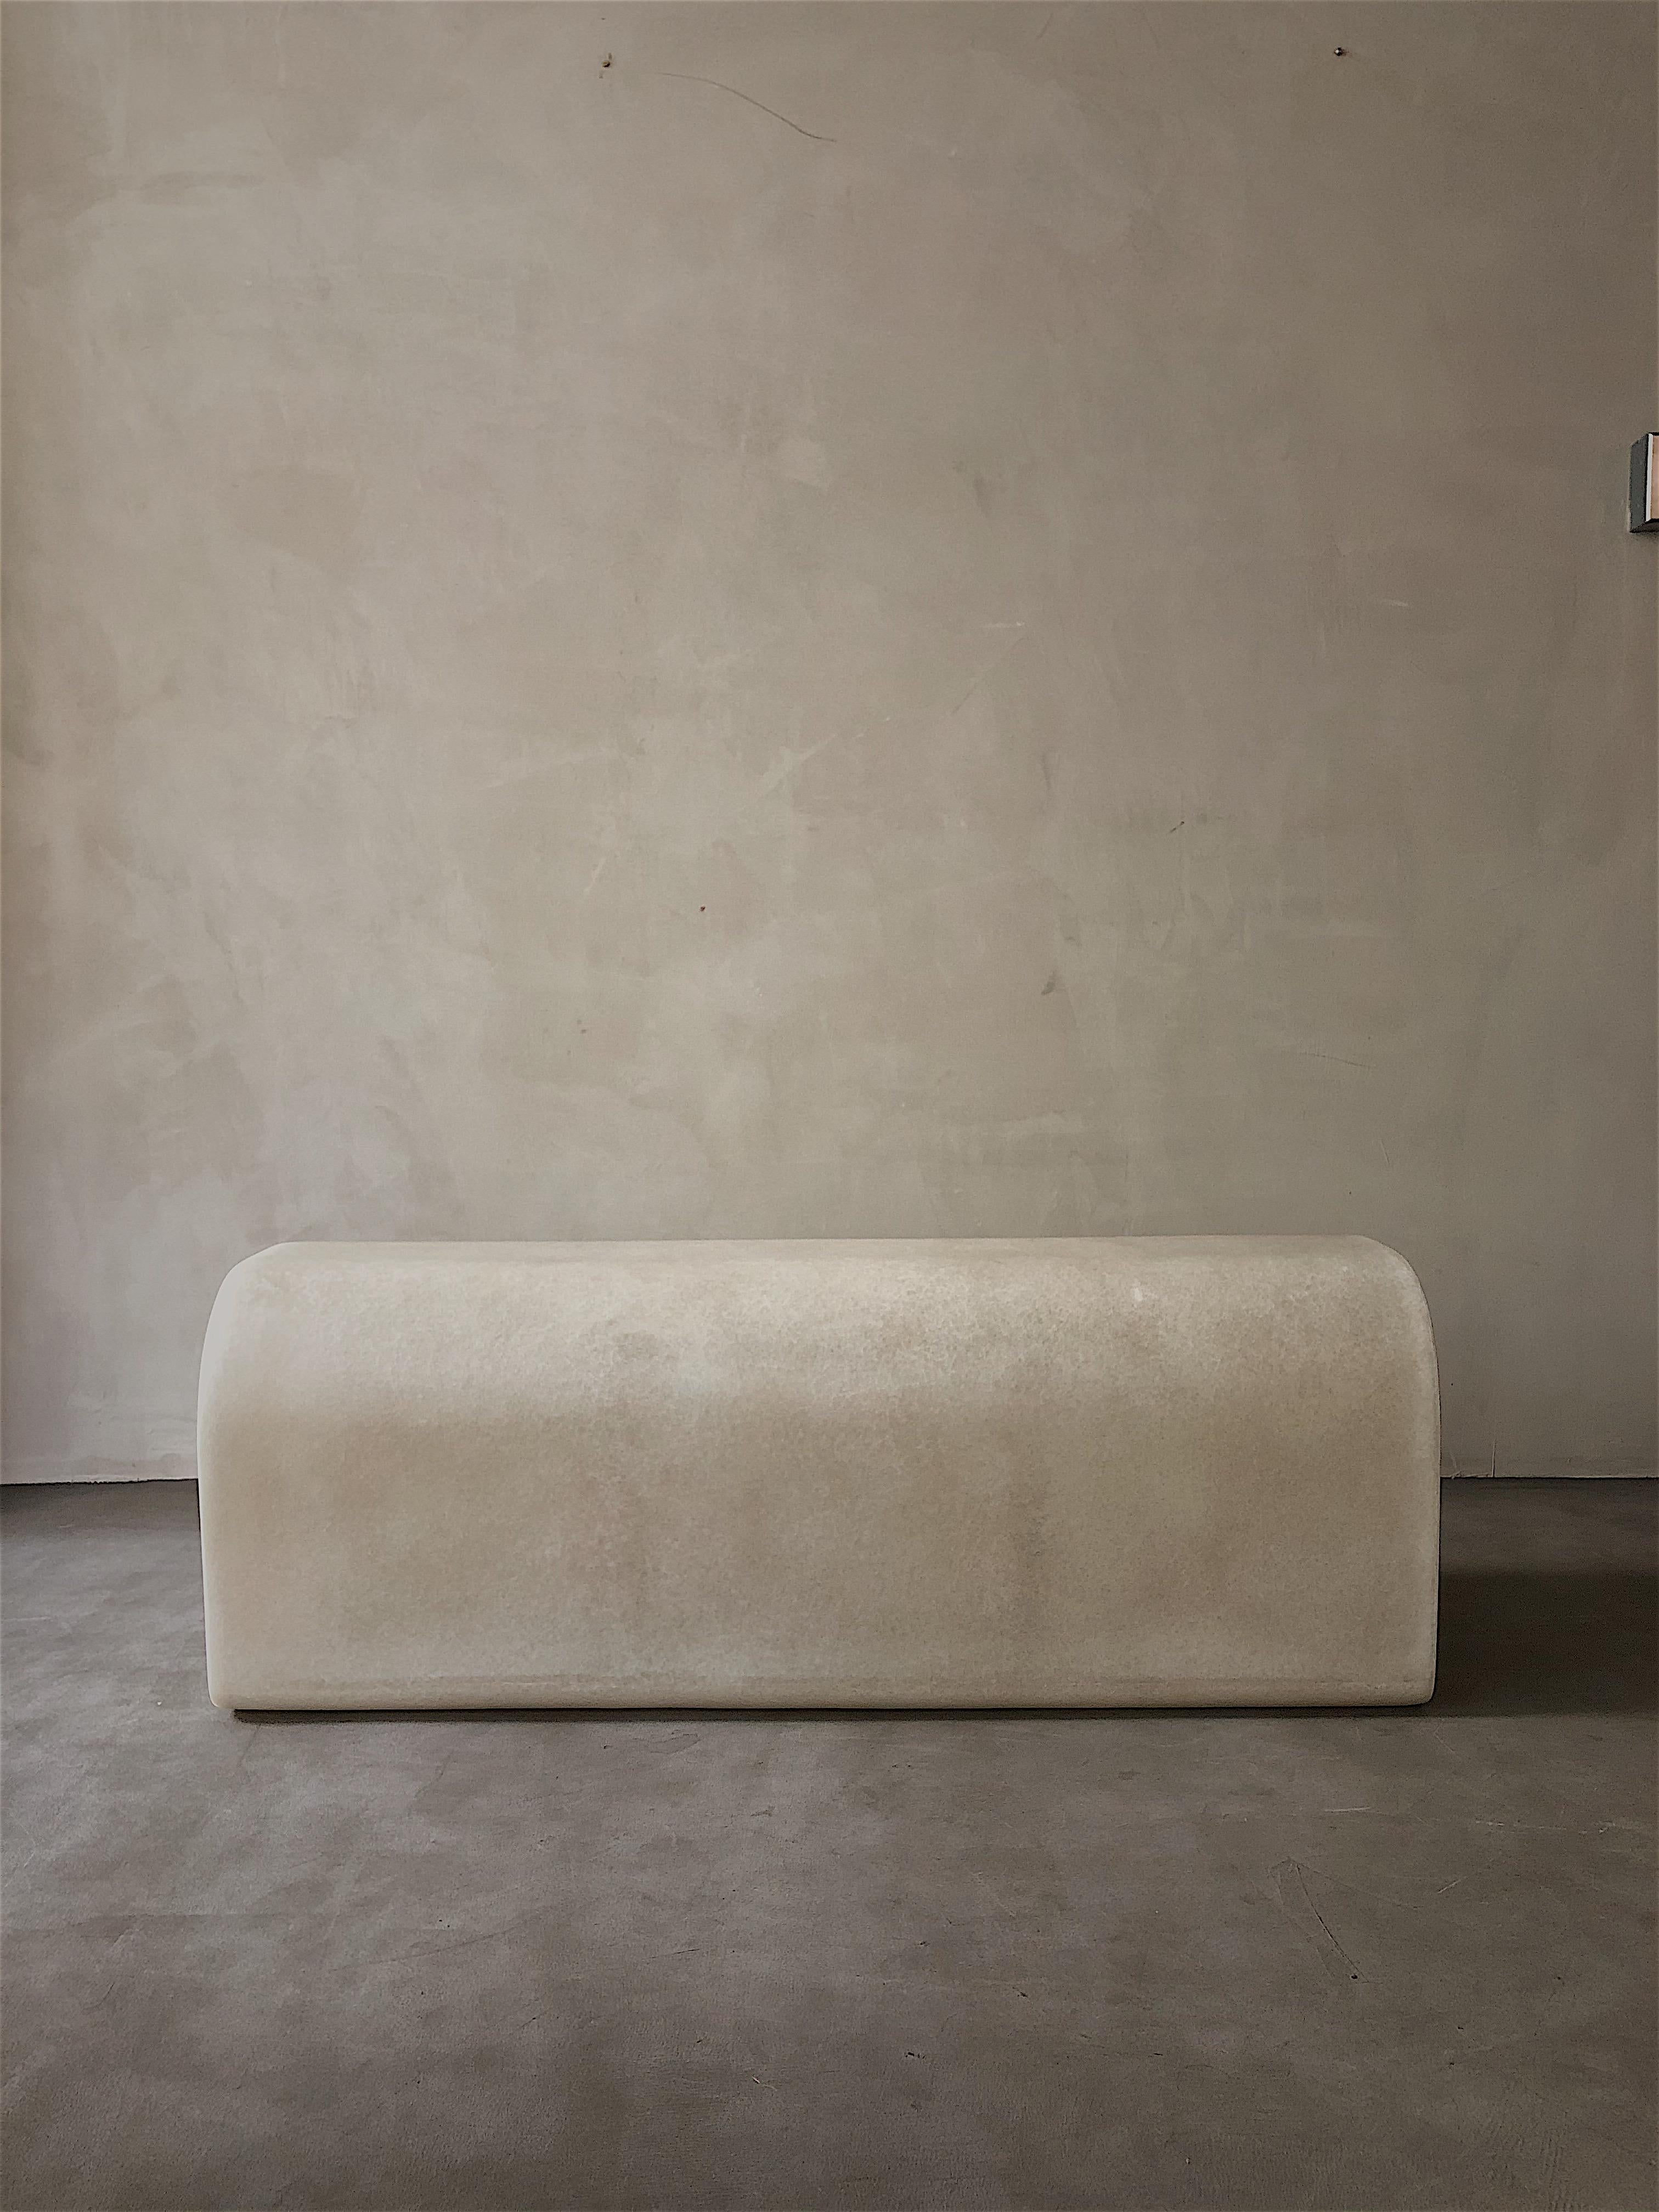 Chinese White Arch Bench by Karstudio